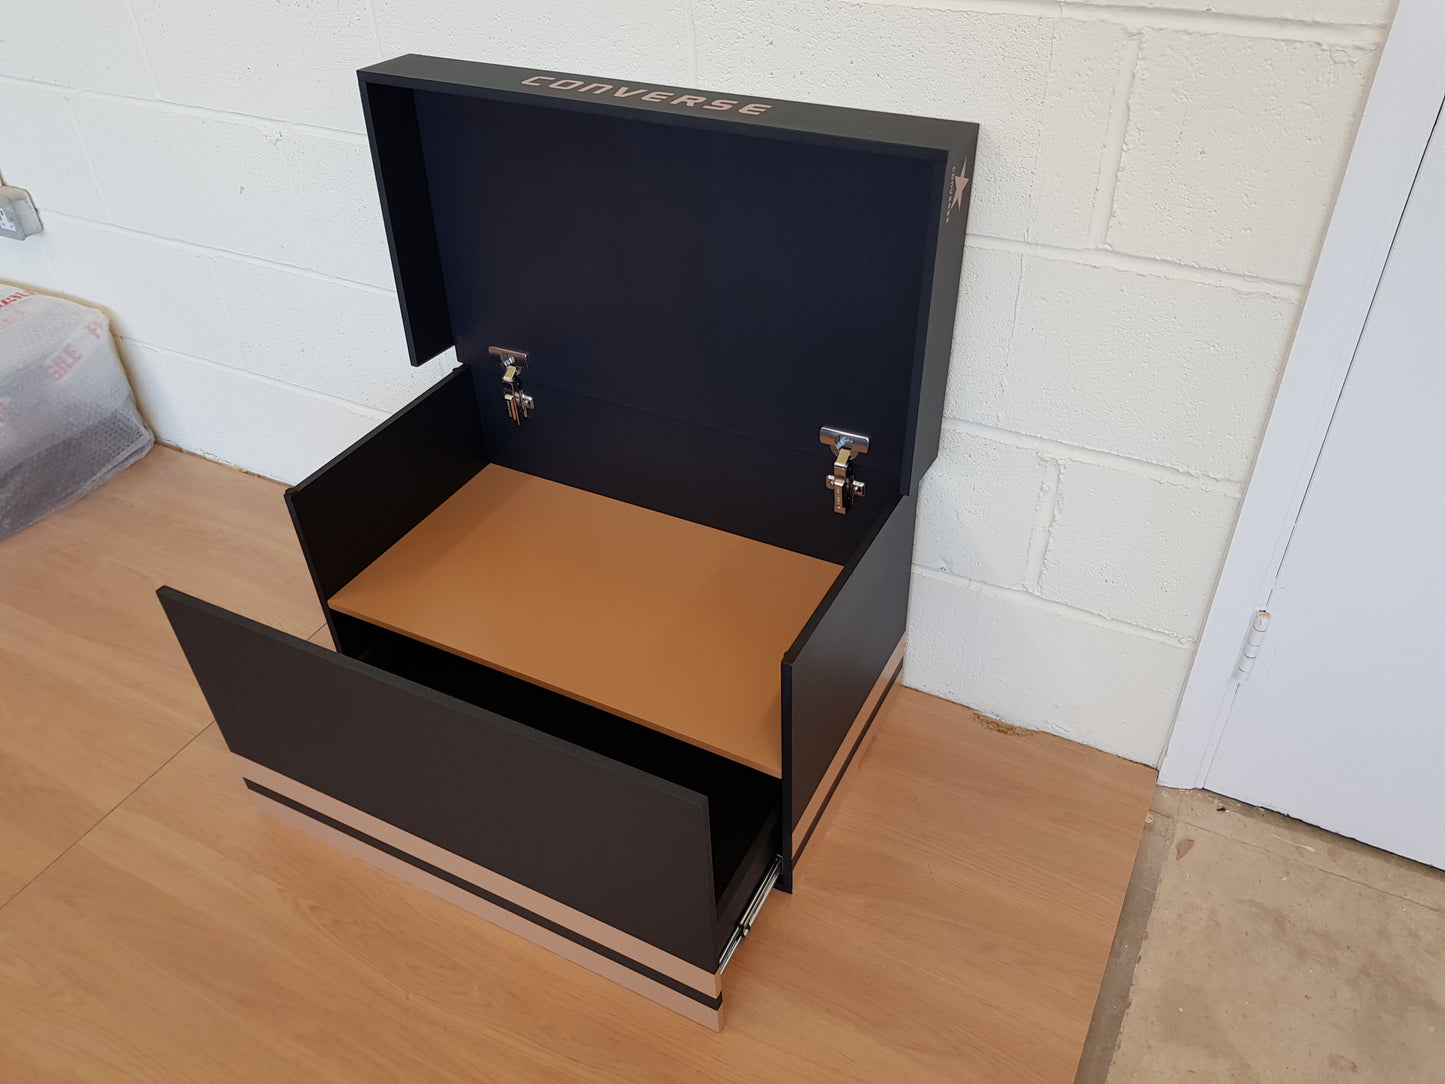 XL Trainer Storage Box - Holds 6no pairs of trainers